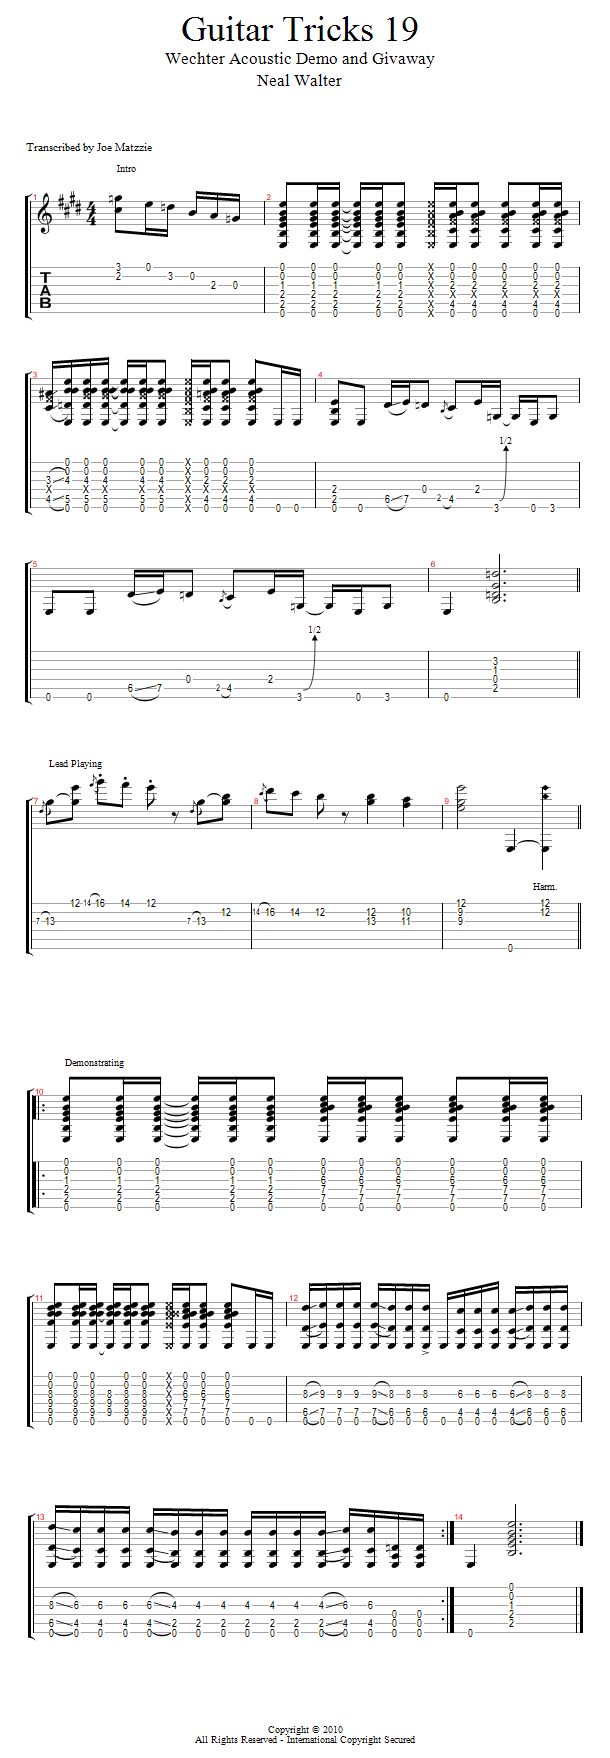 Guitar Tricks 19: Wechter Acoustic Demo and Giveaway song notation